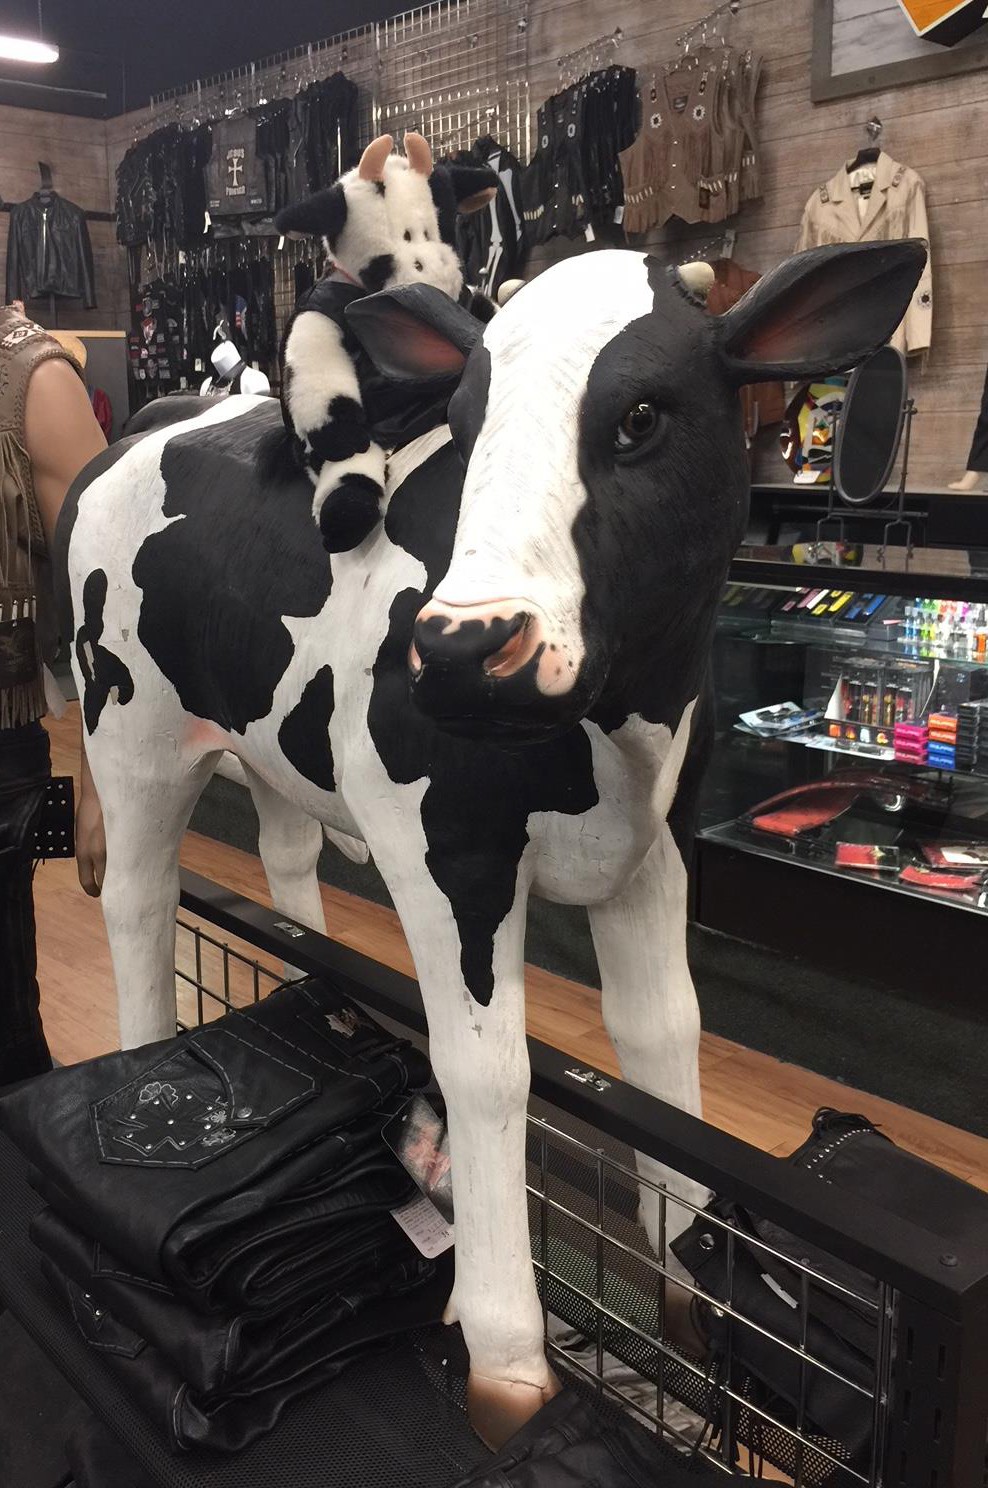 JAMIN LEATHER BABY COW ON DISPLAY